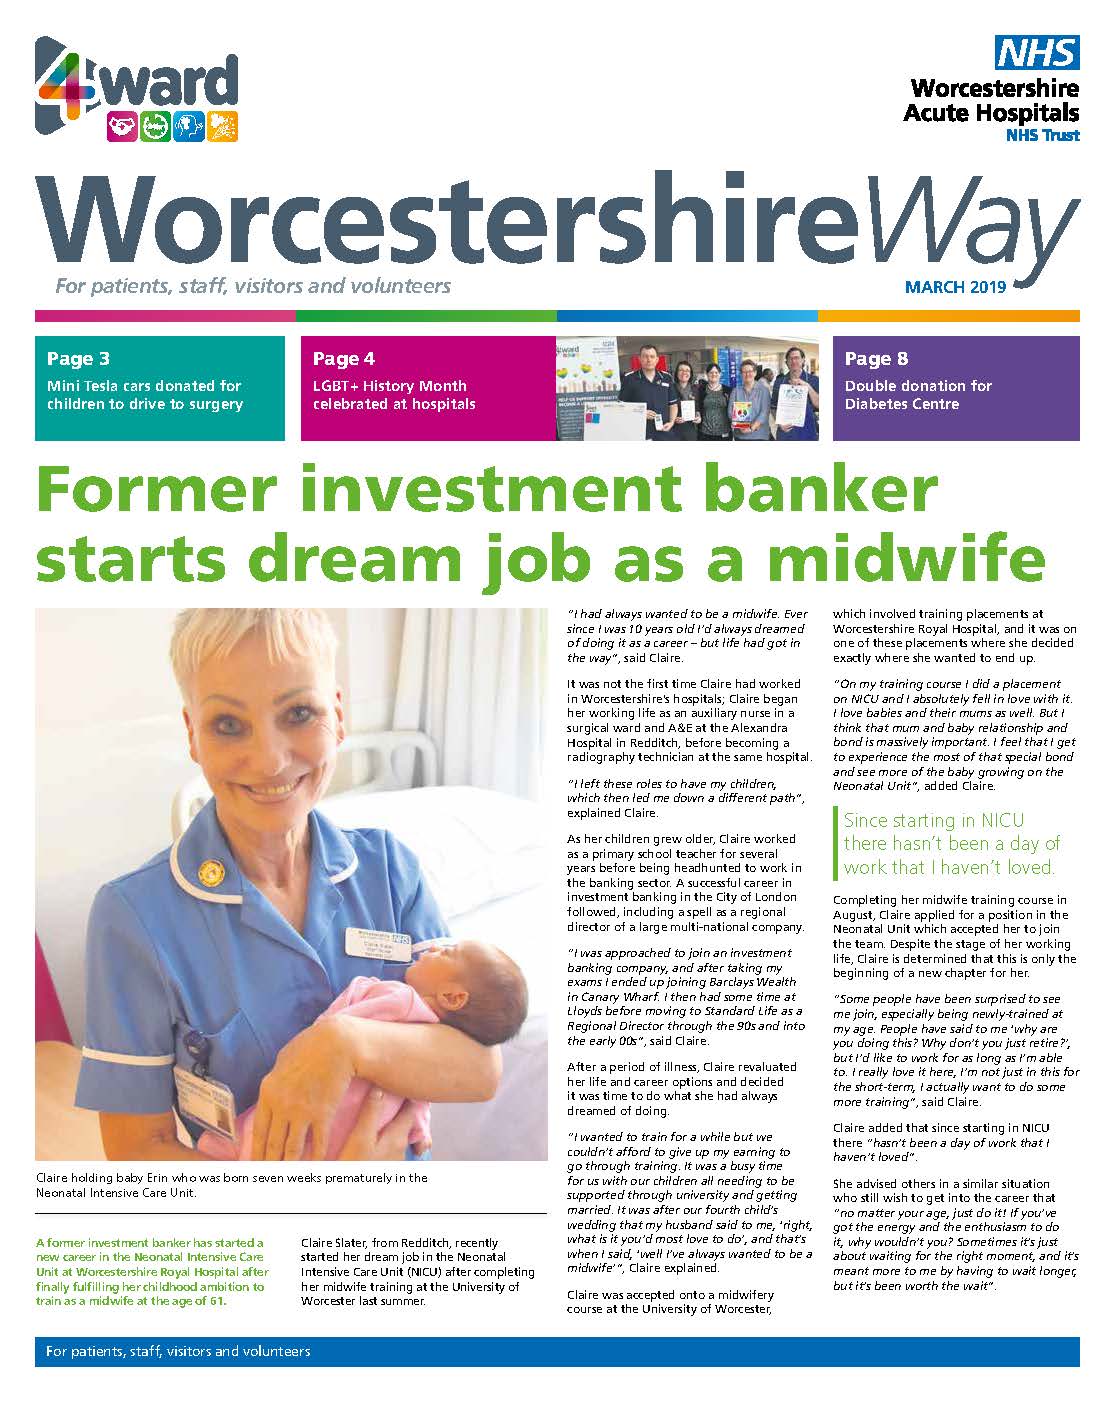 Worcestershire Way March 2019 WEB Page 1